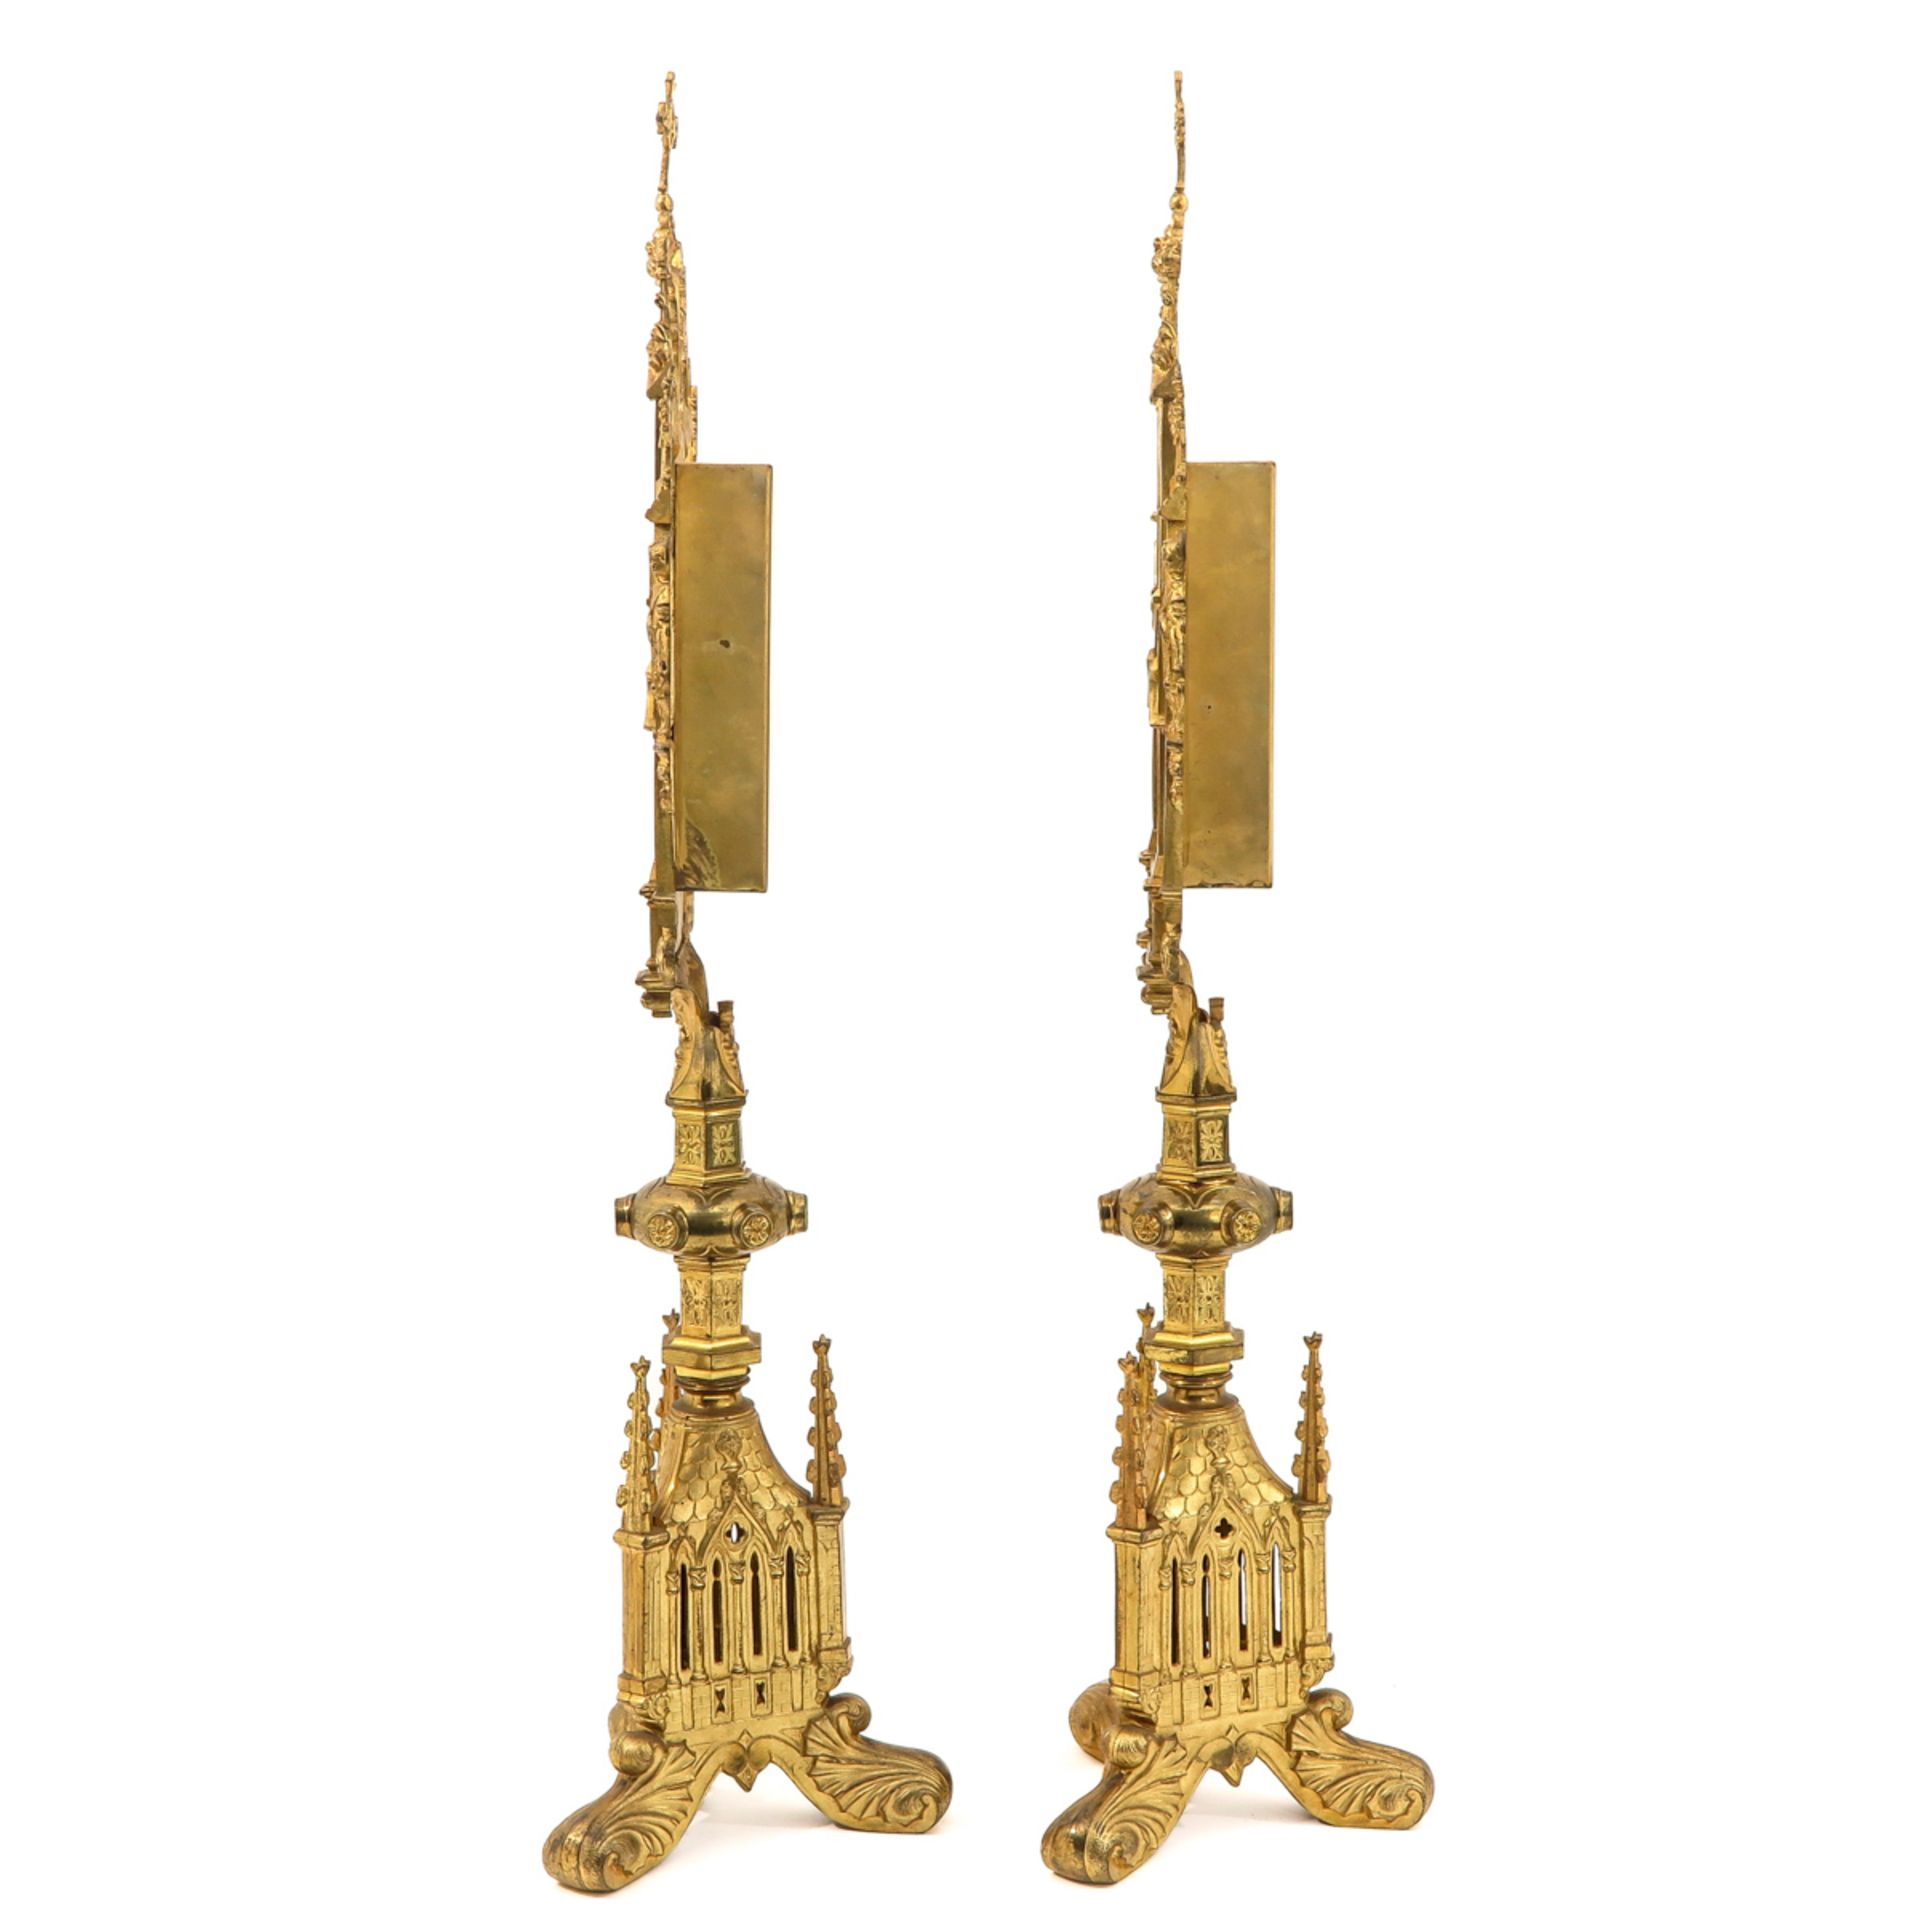 A Pair of Neo Gothic Gilded Reliquaries - Image 2 of 10